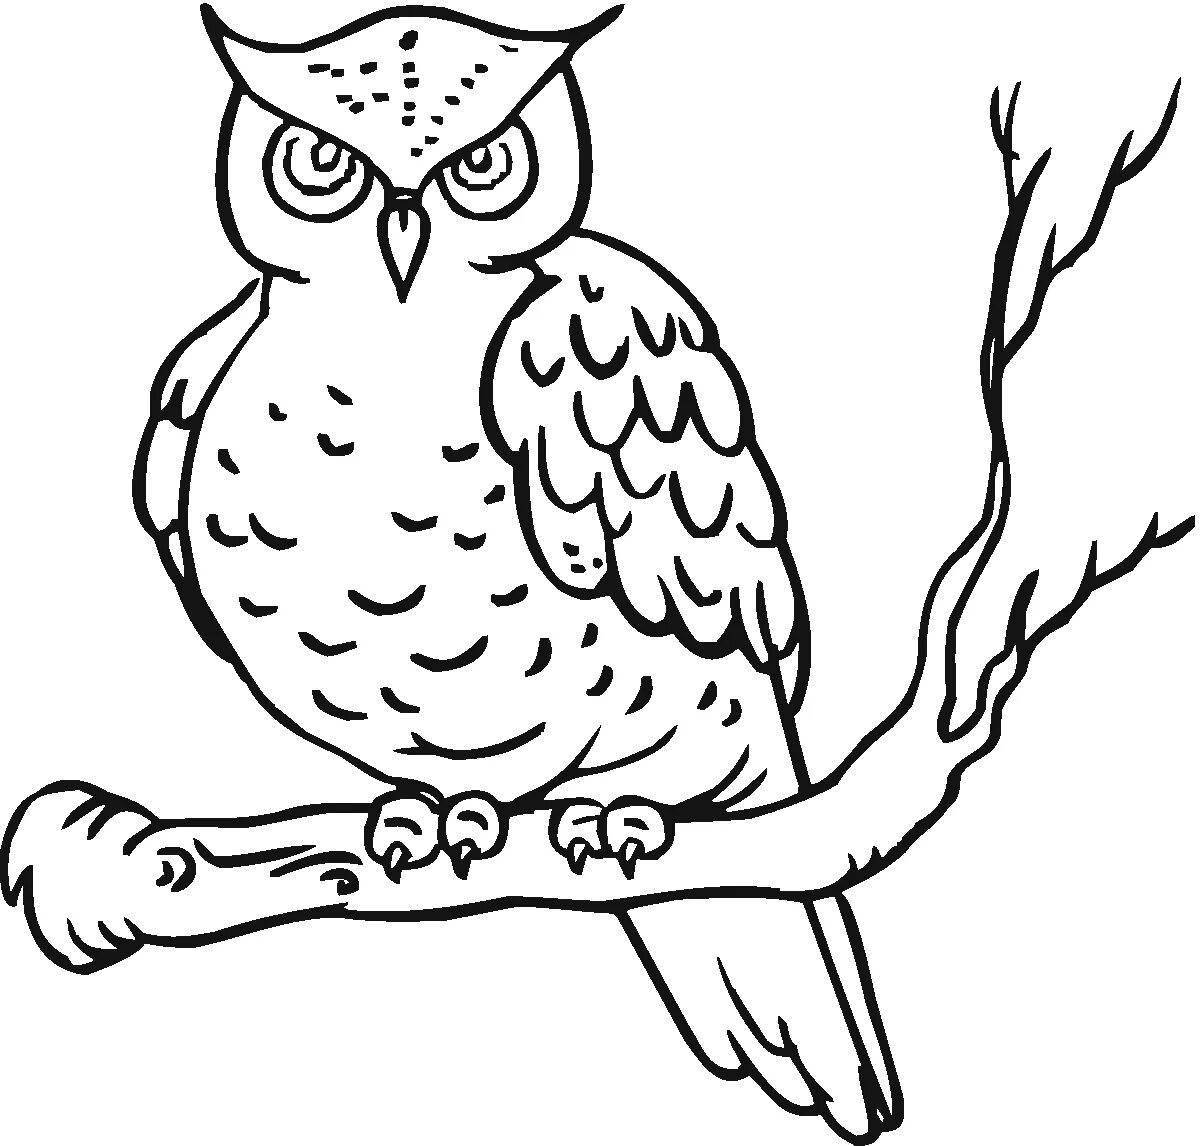 Charming long-eared owl coloring book